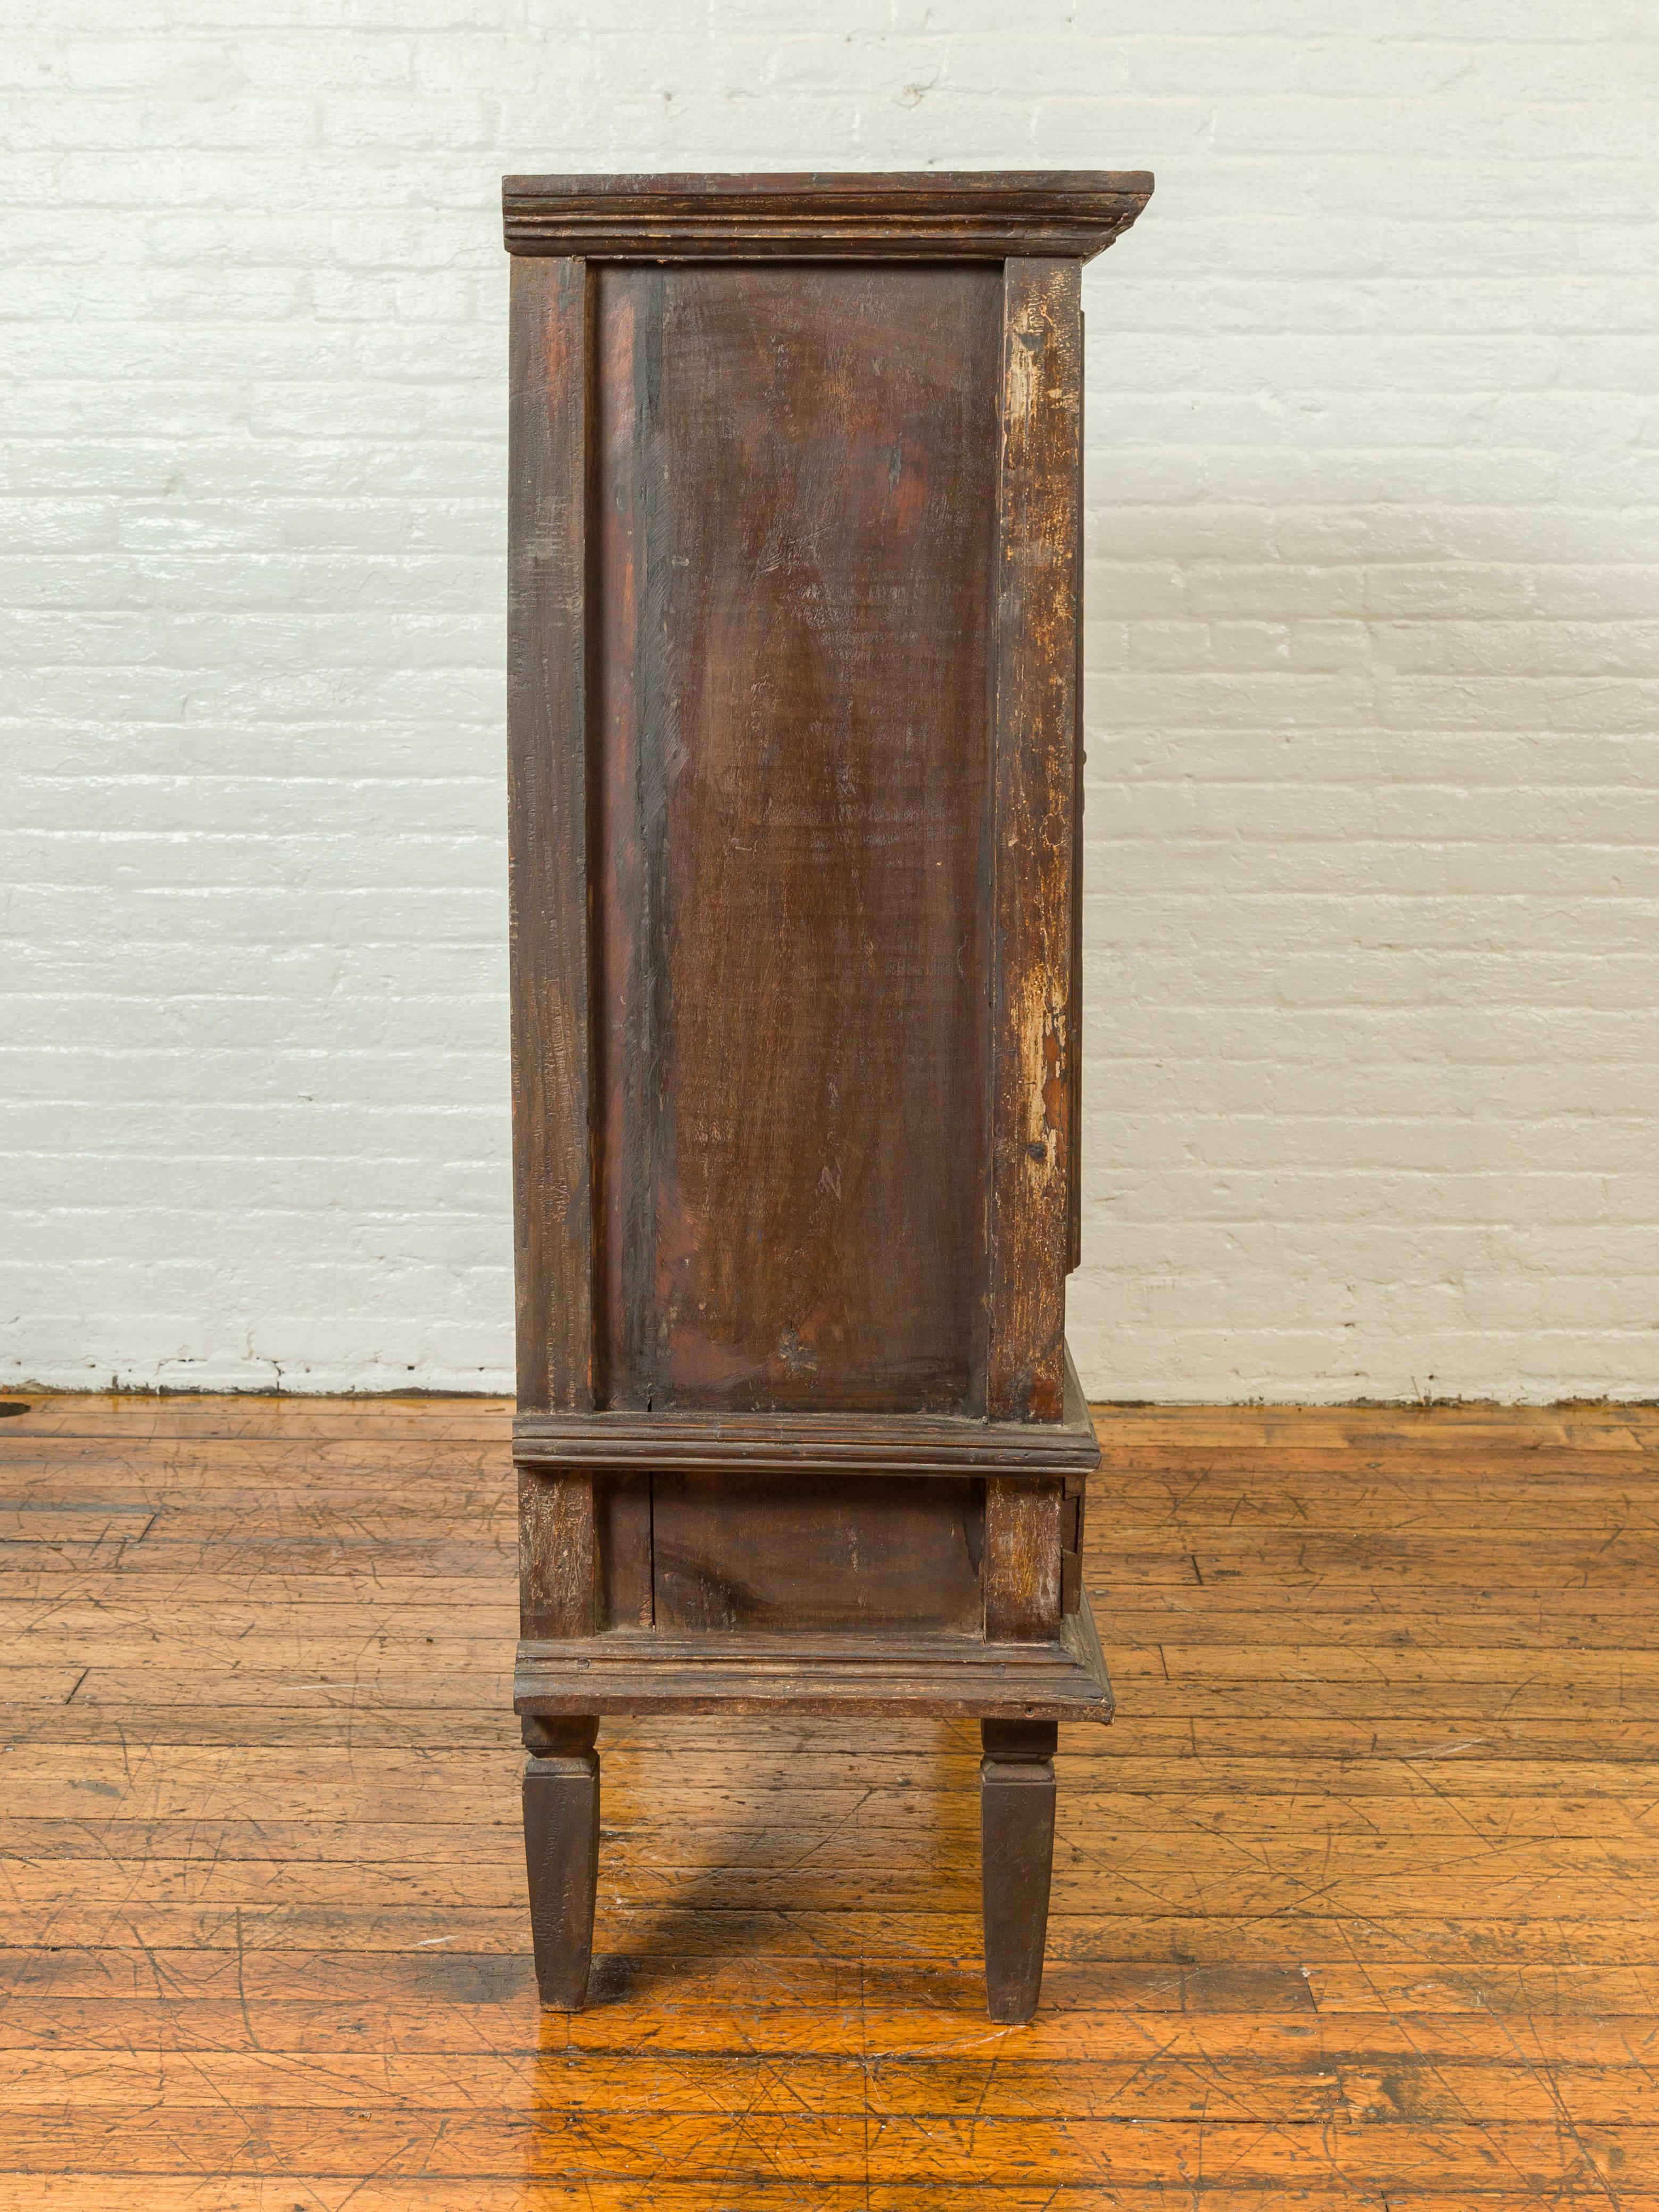 19th Century Indonesian Wooden Cabinet with Doors, Drawers and Carved Medallions For Sale 5